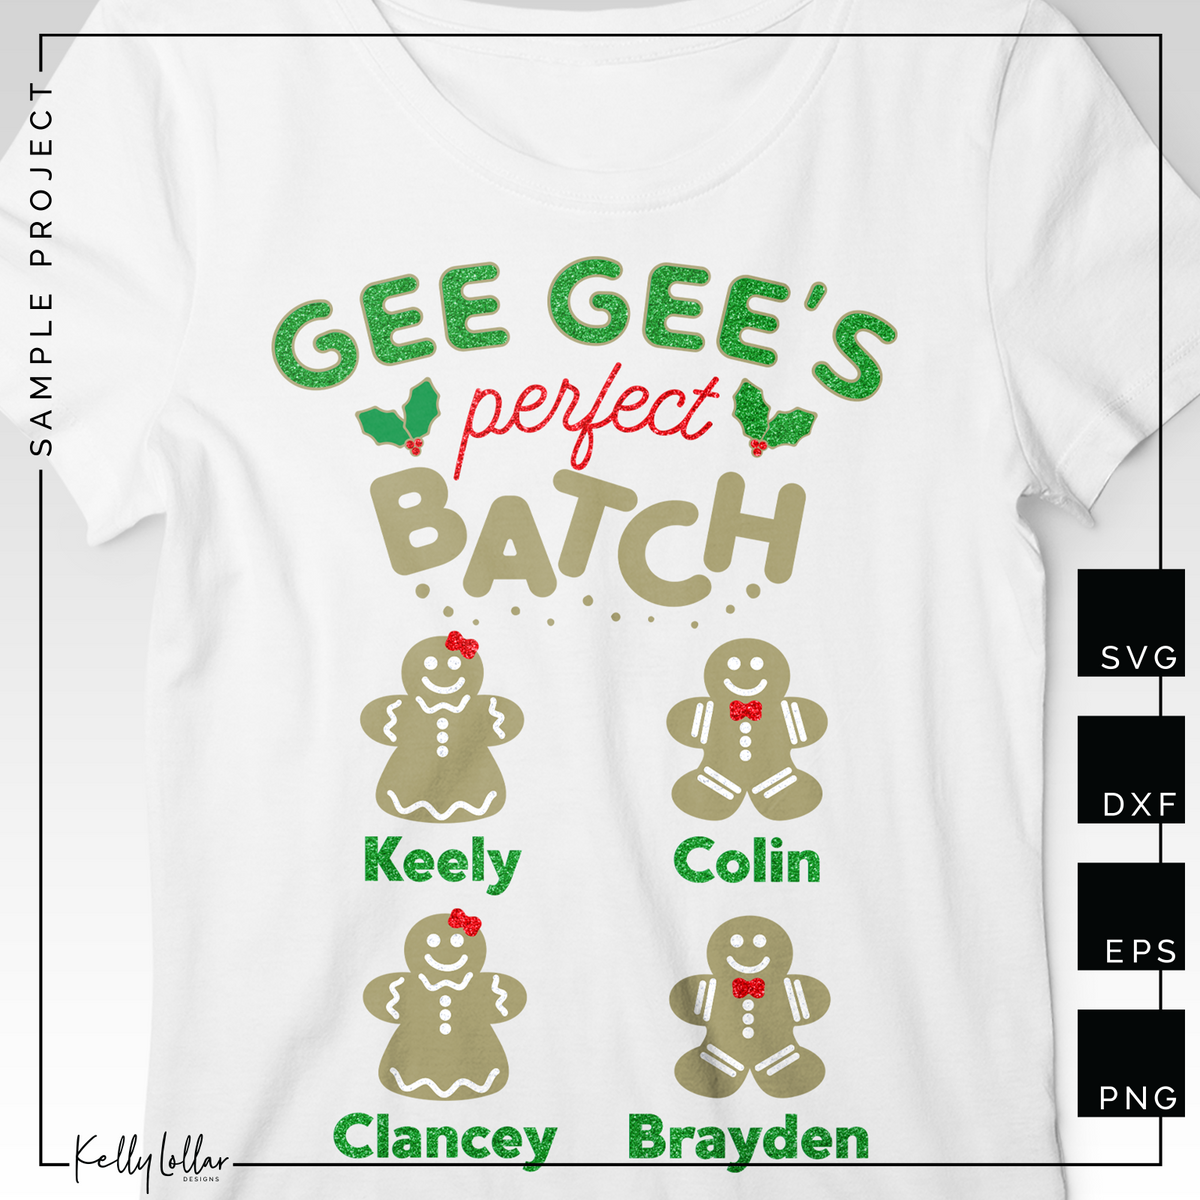 Gee Gee&#39;s Perfect Batch | Christmas Shirt Design for Gee Gee&#39;s with Gingerbread Cookies for Children&#39;s Names | SVG DXF PNG Cut Files